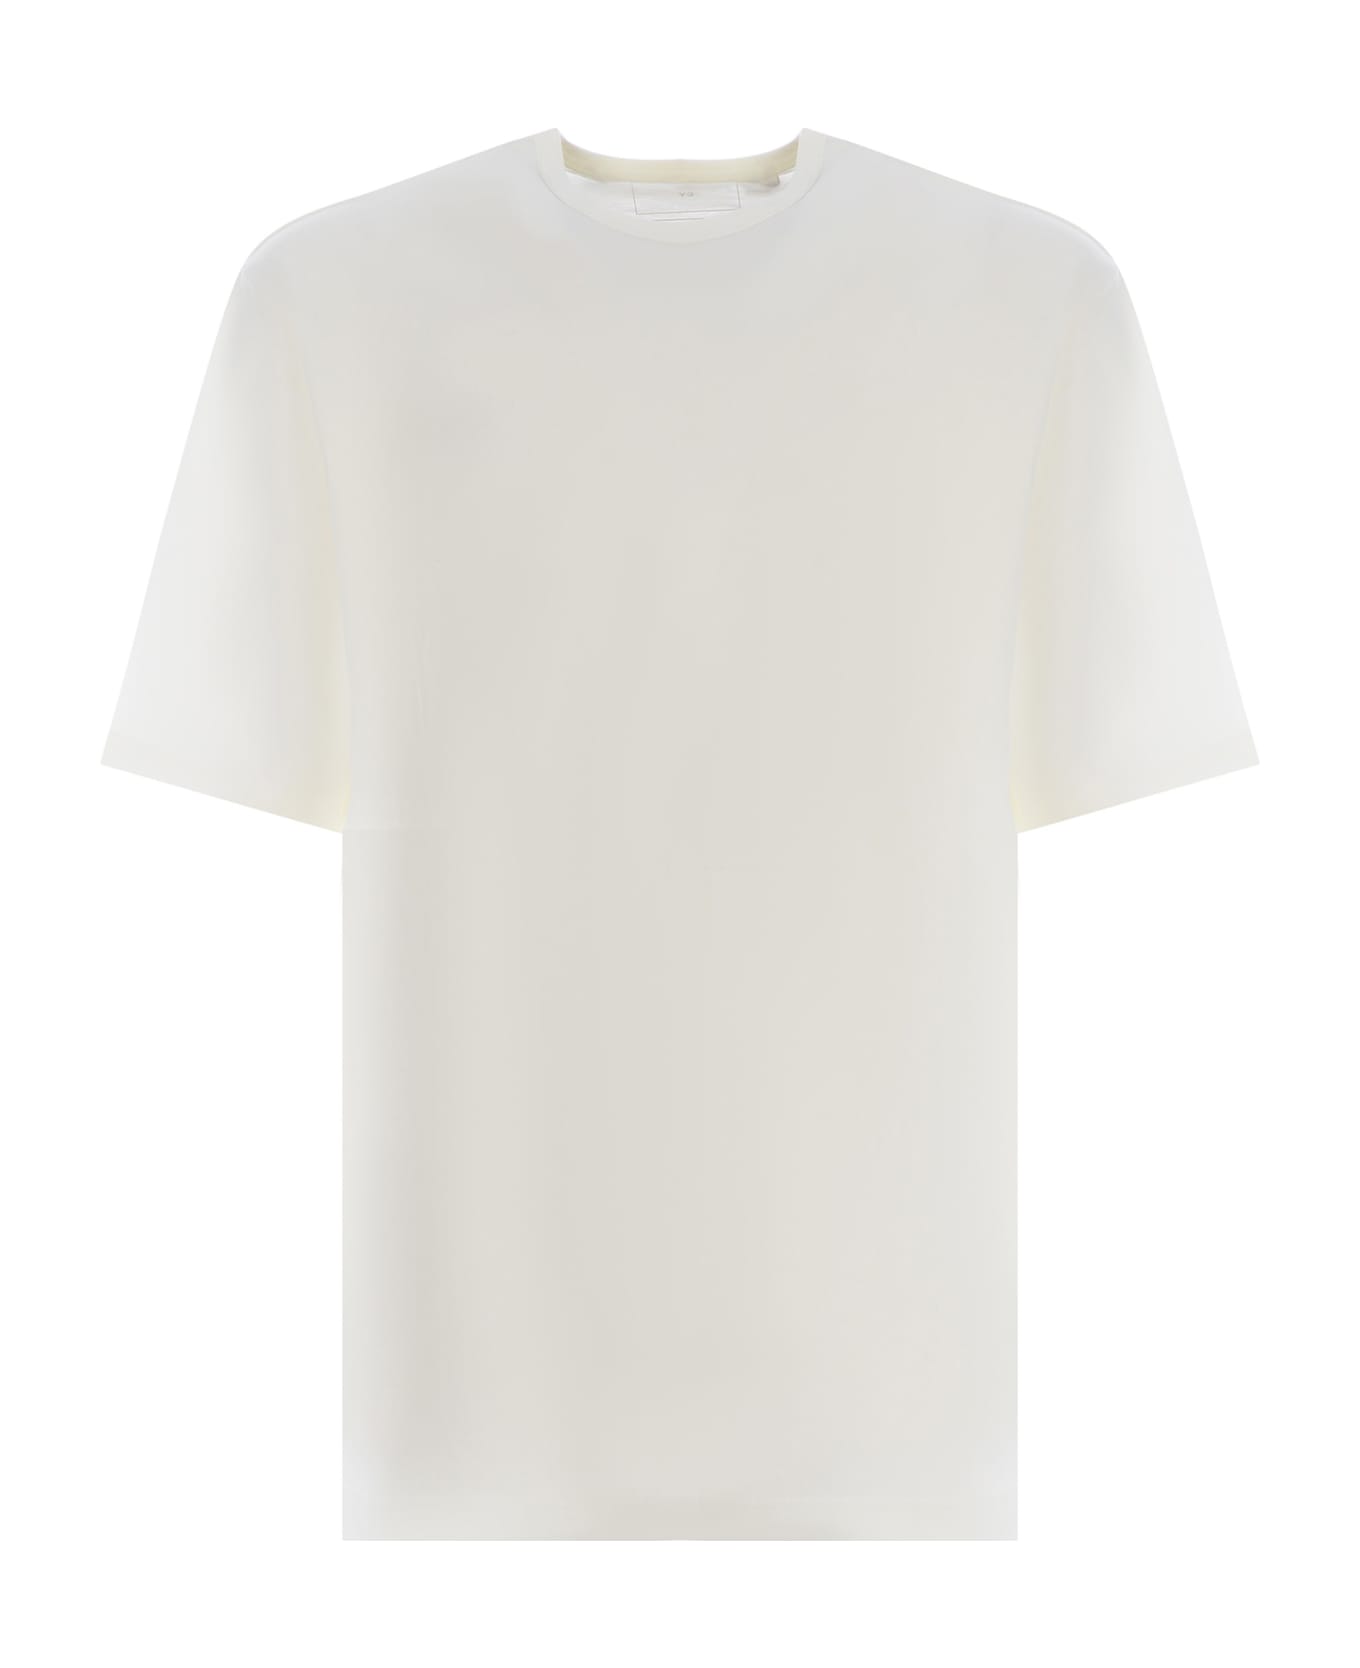 Y-3 Boxy Fit T-shirt - Owhite Tシャツ